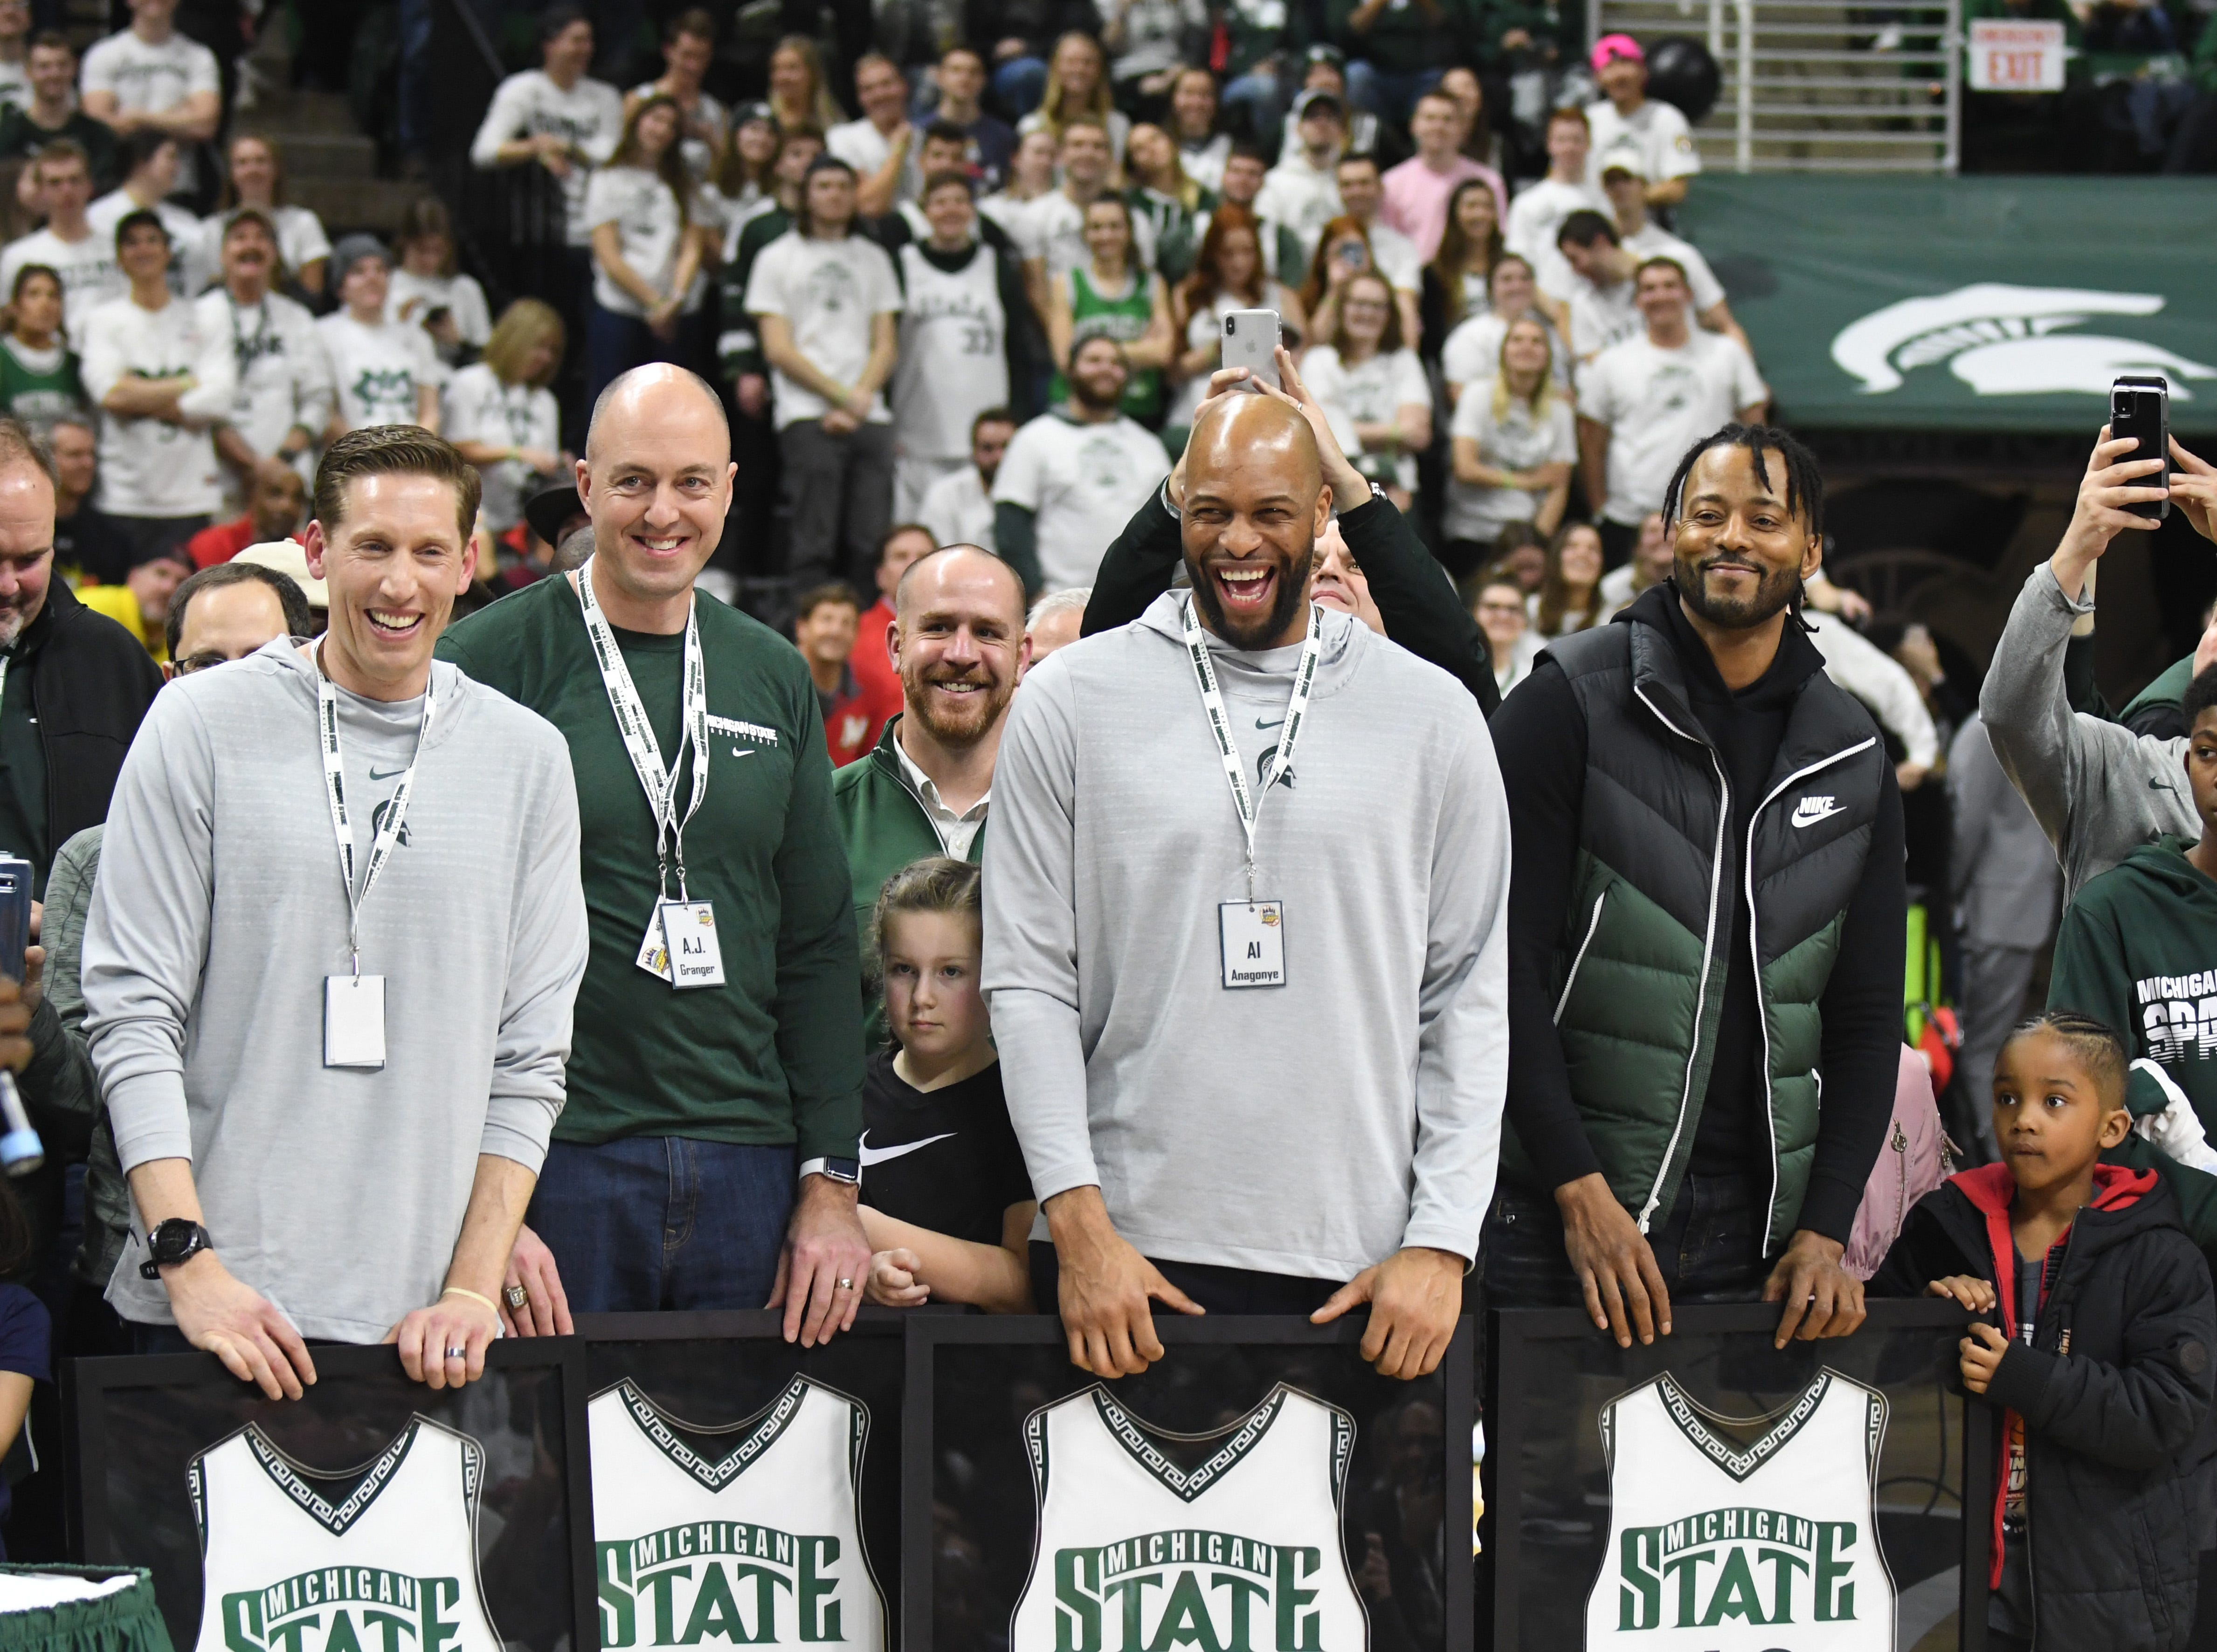 Michigan State ' s 2000 championship team members, from left, Steve Cherry, A. J. Granger, Aloyisus Anagonye and Morris Peterson were honored during a ceremony this past season at the Breslin Center.